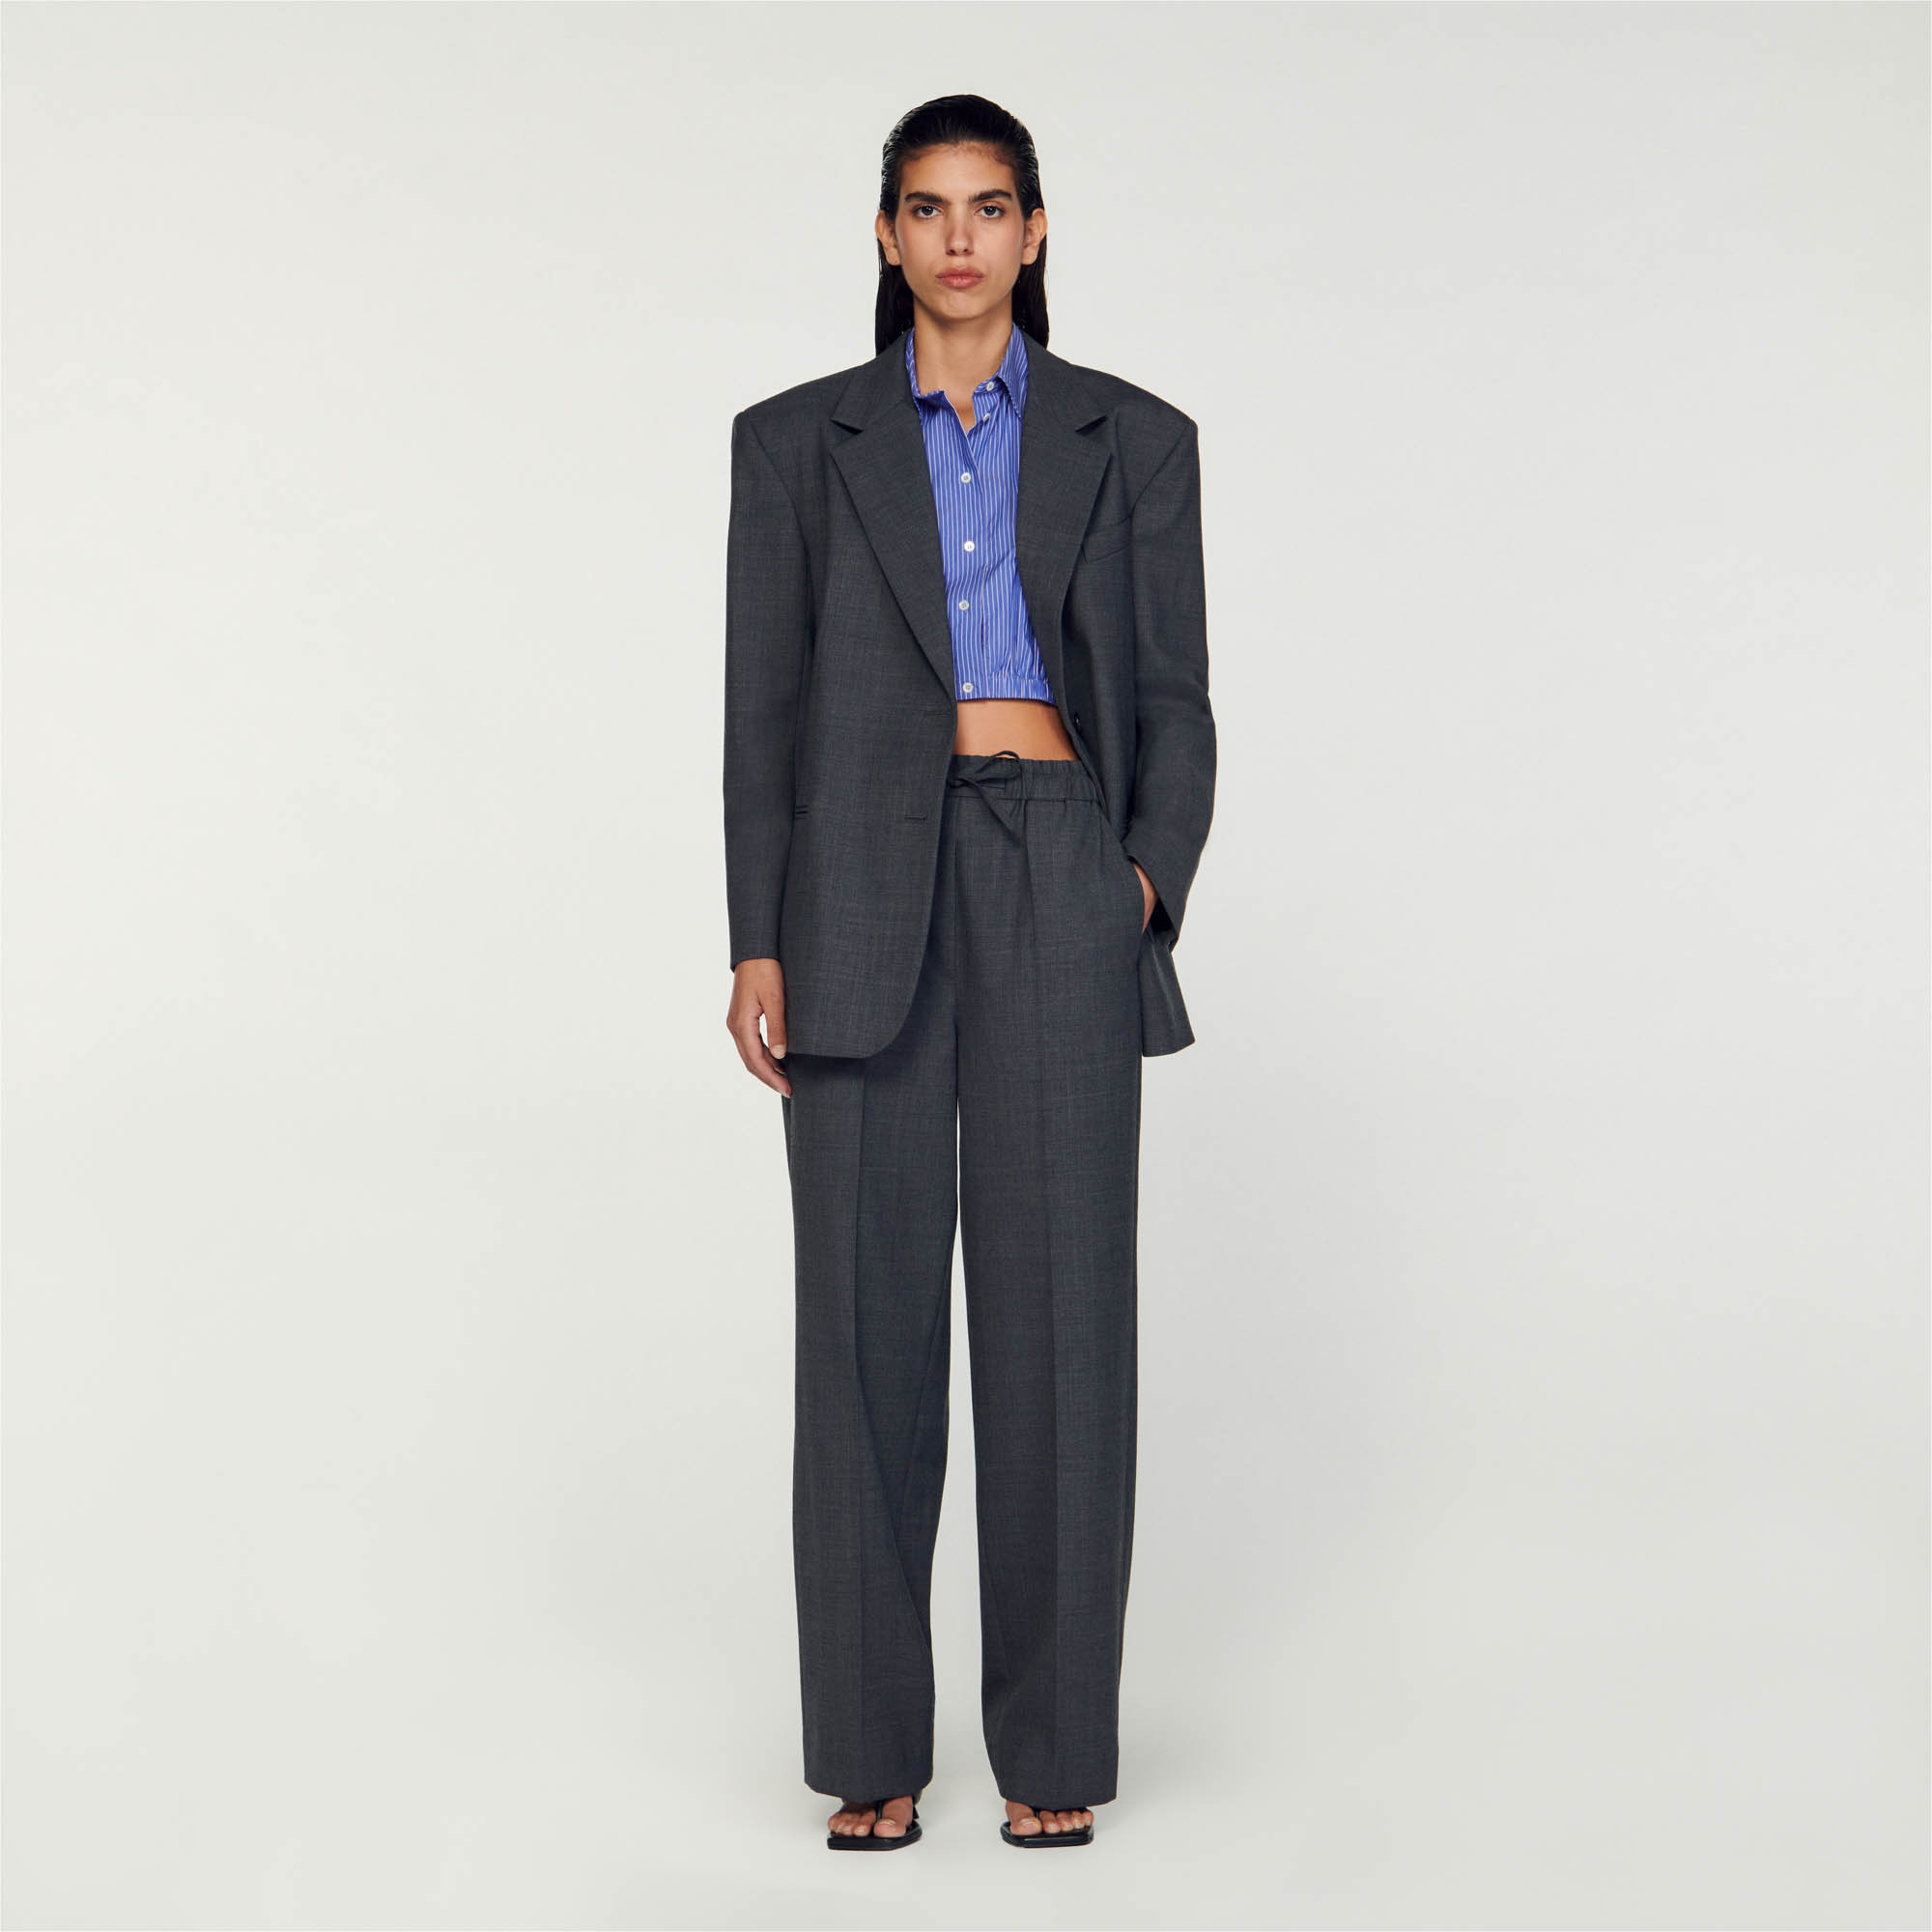 Sandro wool Wide-leg pants with ironed creases and an elasticated drawstring waistband